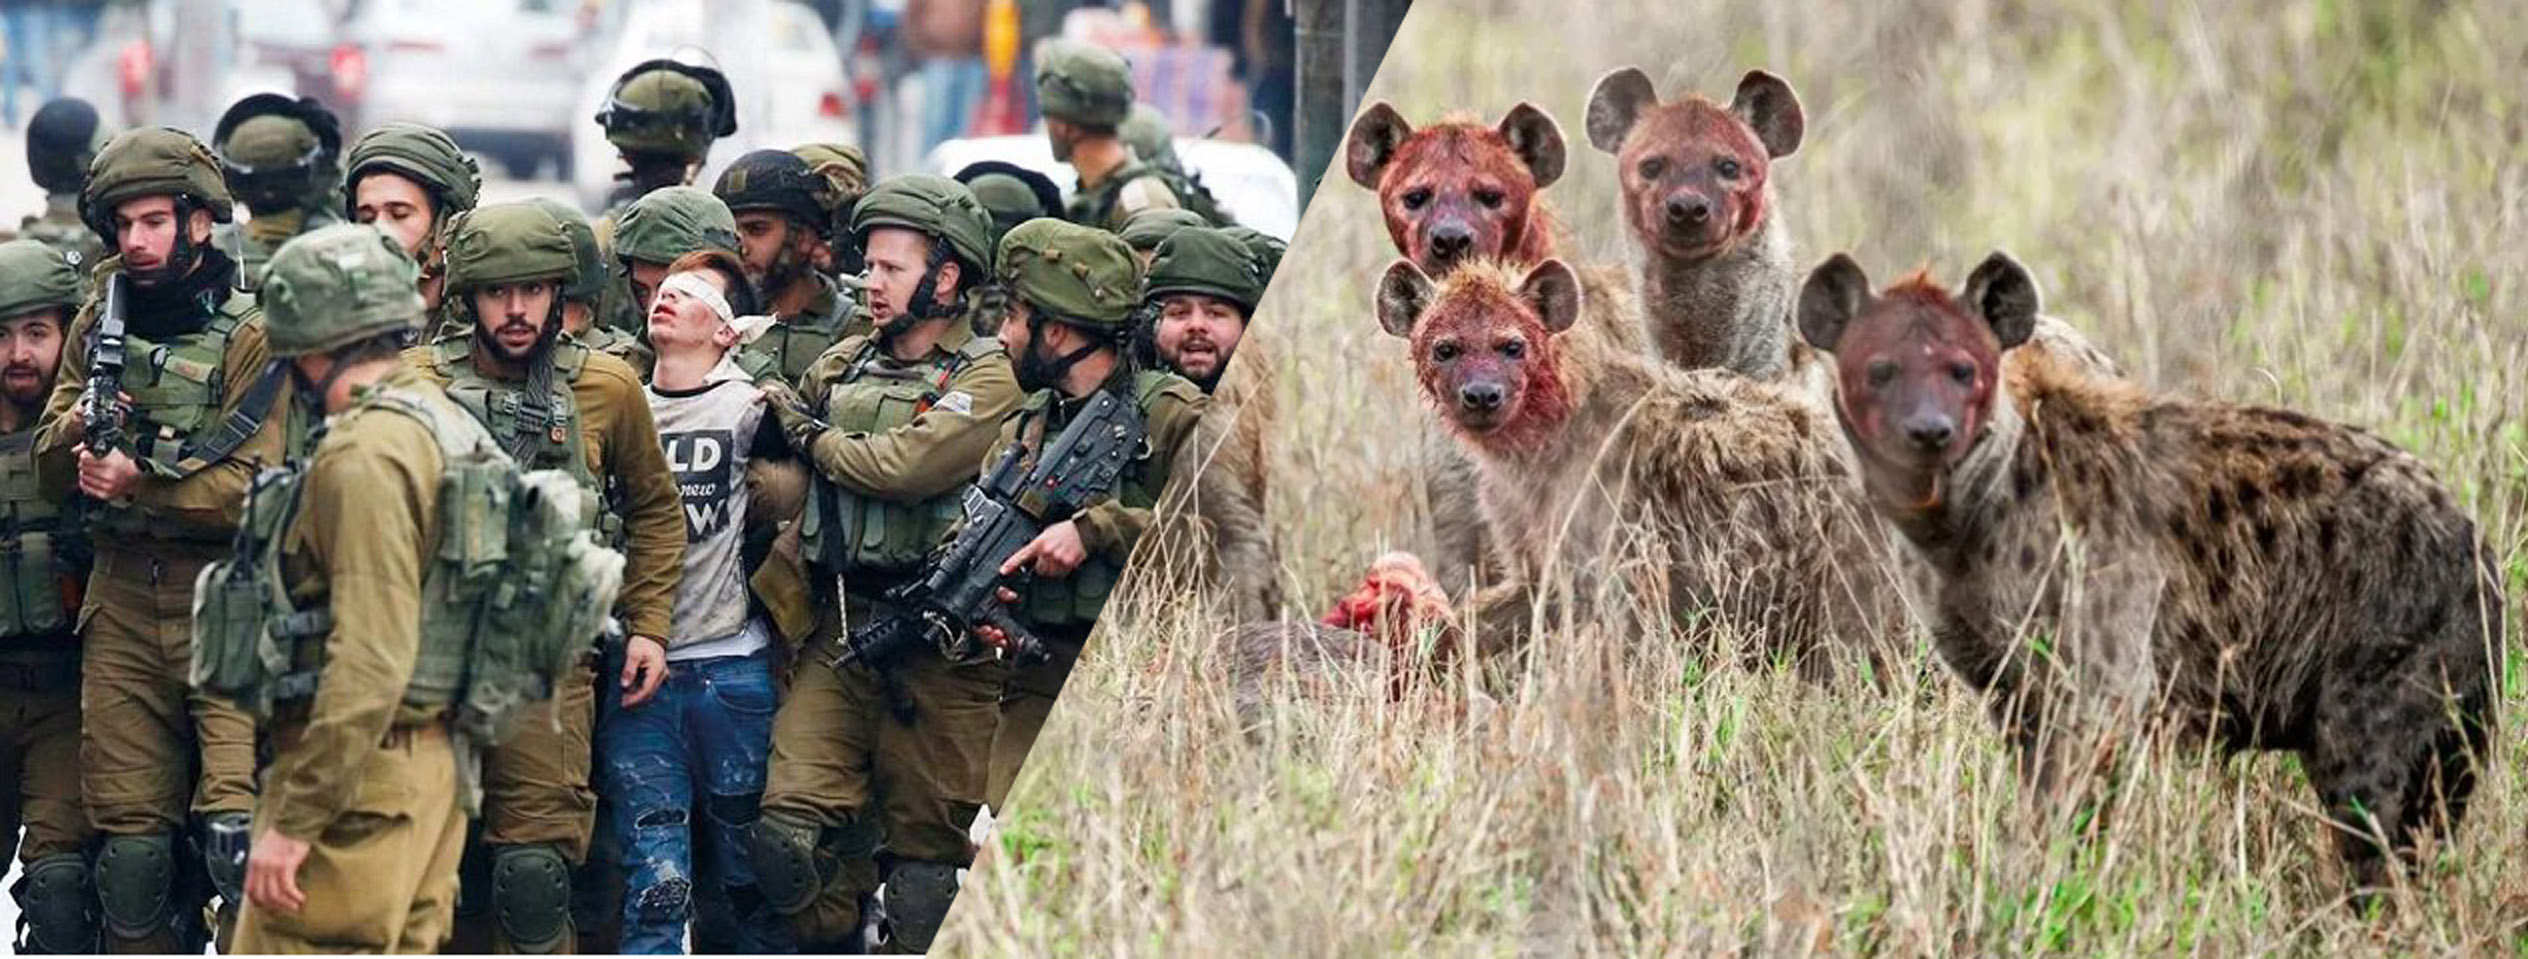 Are the isreal Zionists wild animals?